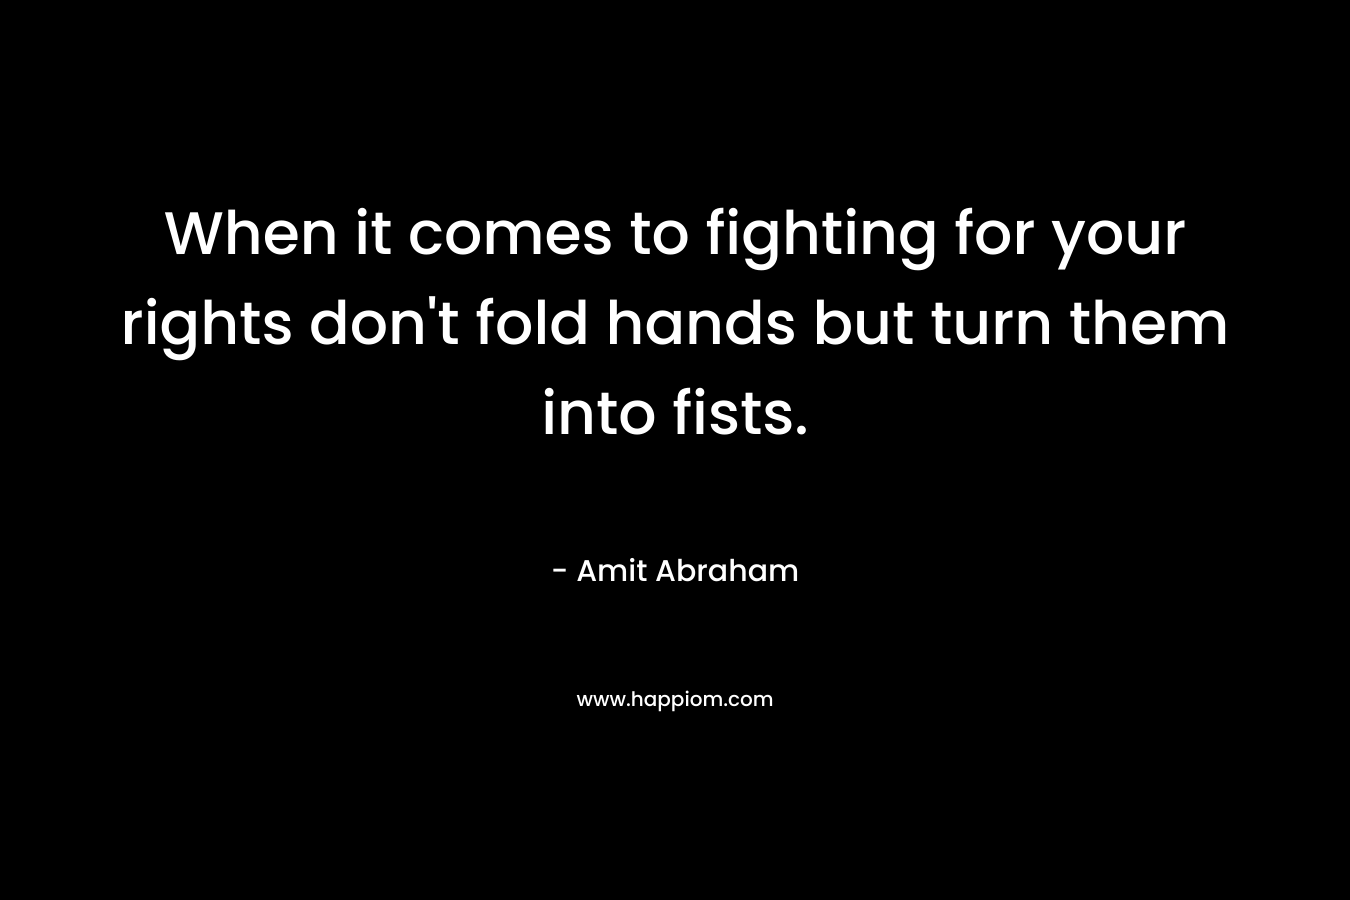 When it comes to fighting for your rights don’t fold hands but turn them into fists. – Amit Abraham